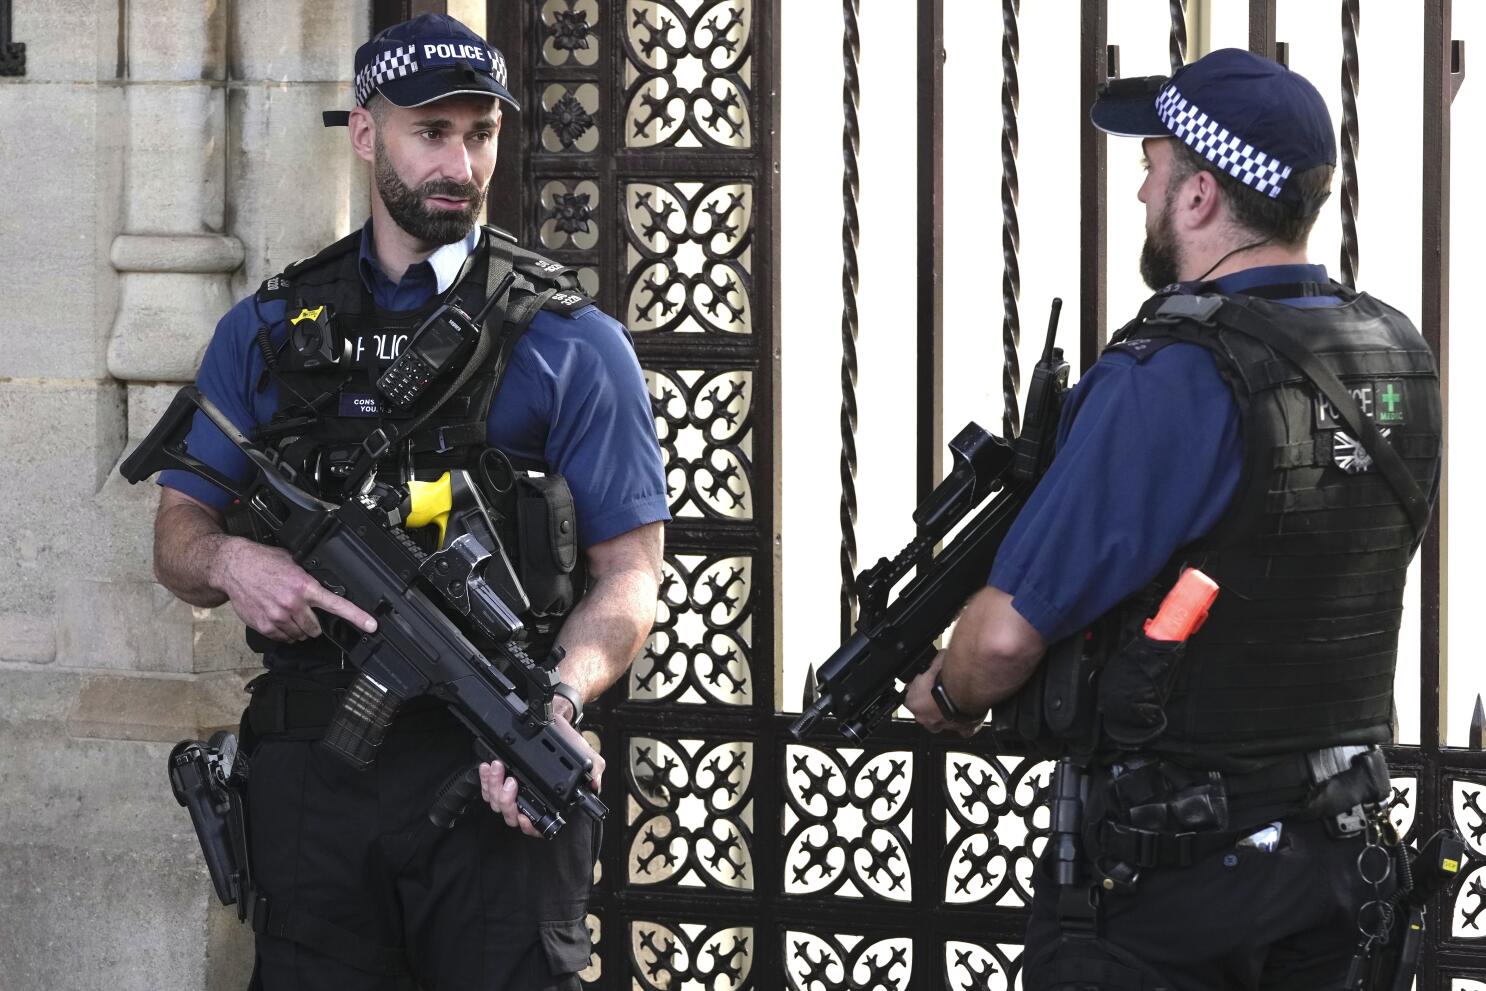 London police call for backup as armed officers lay down guns